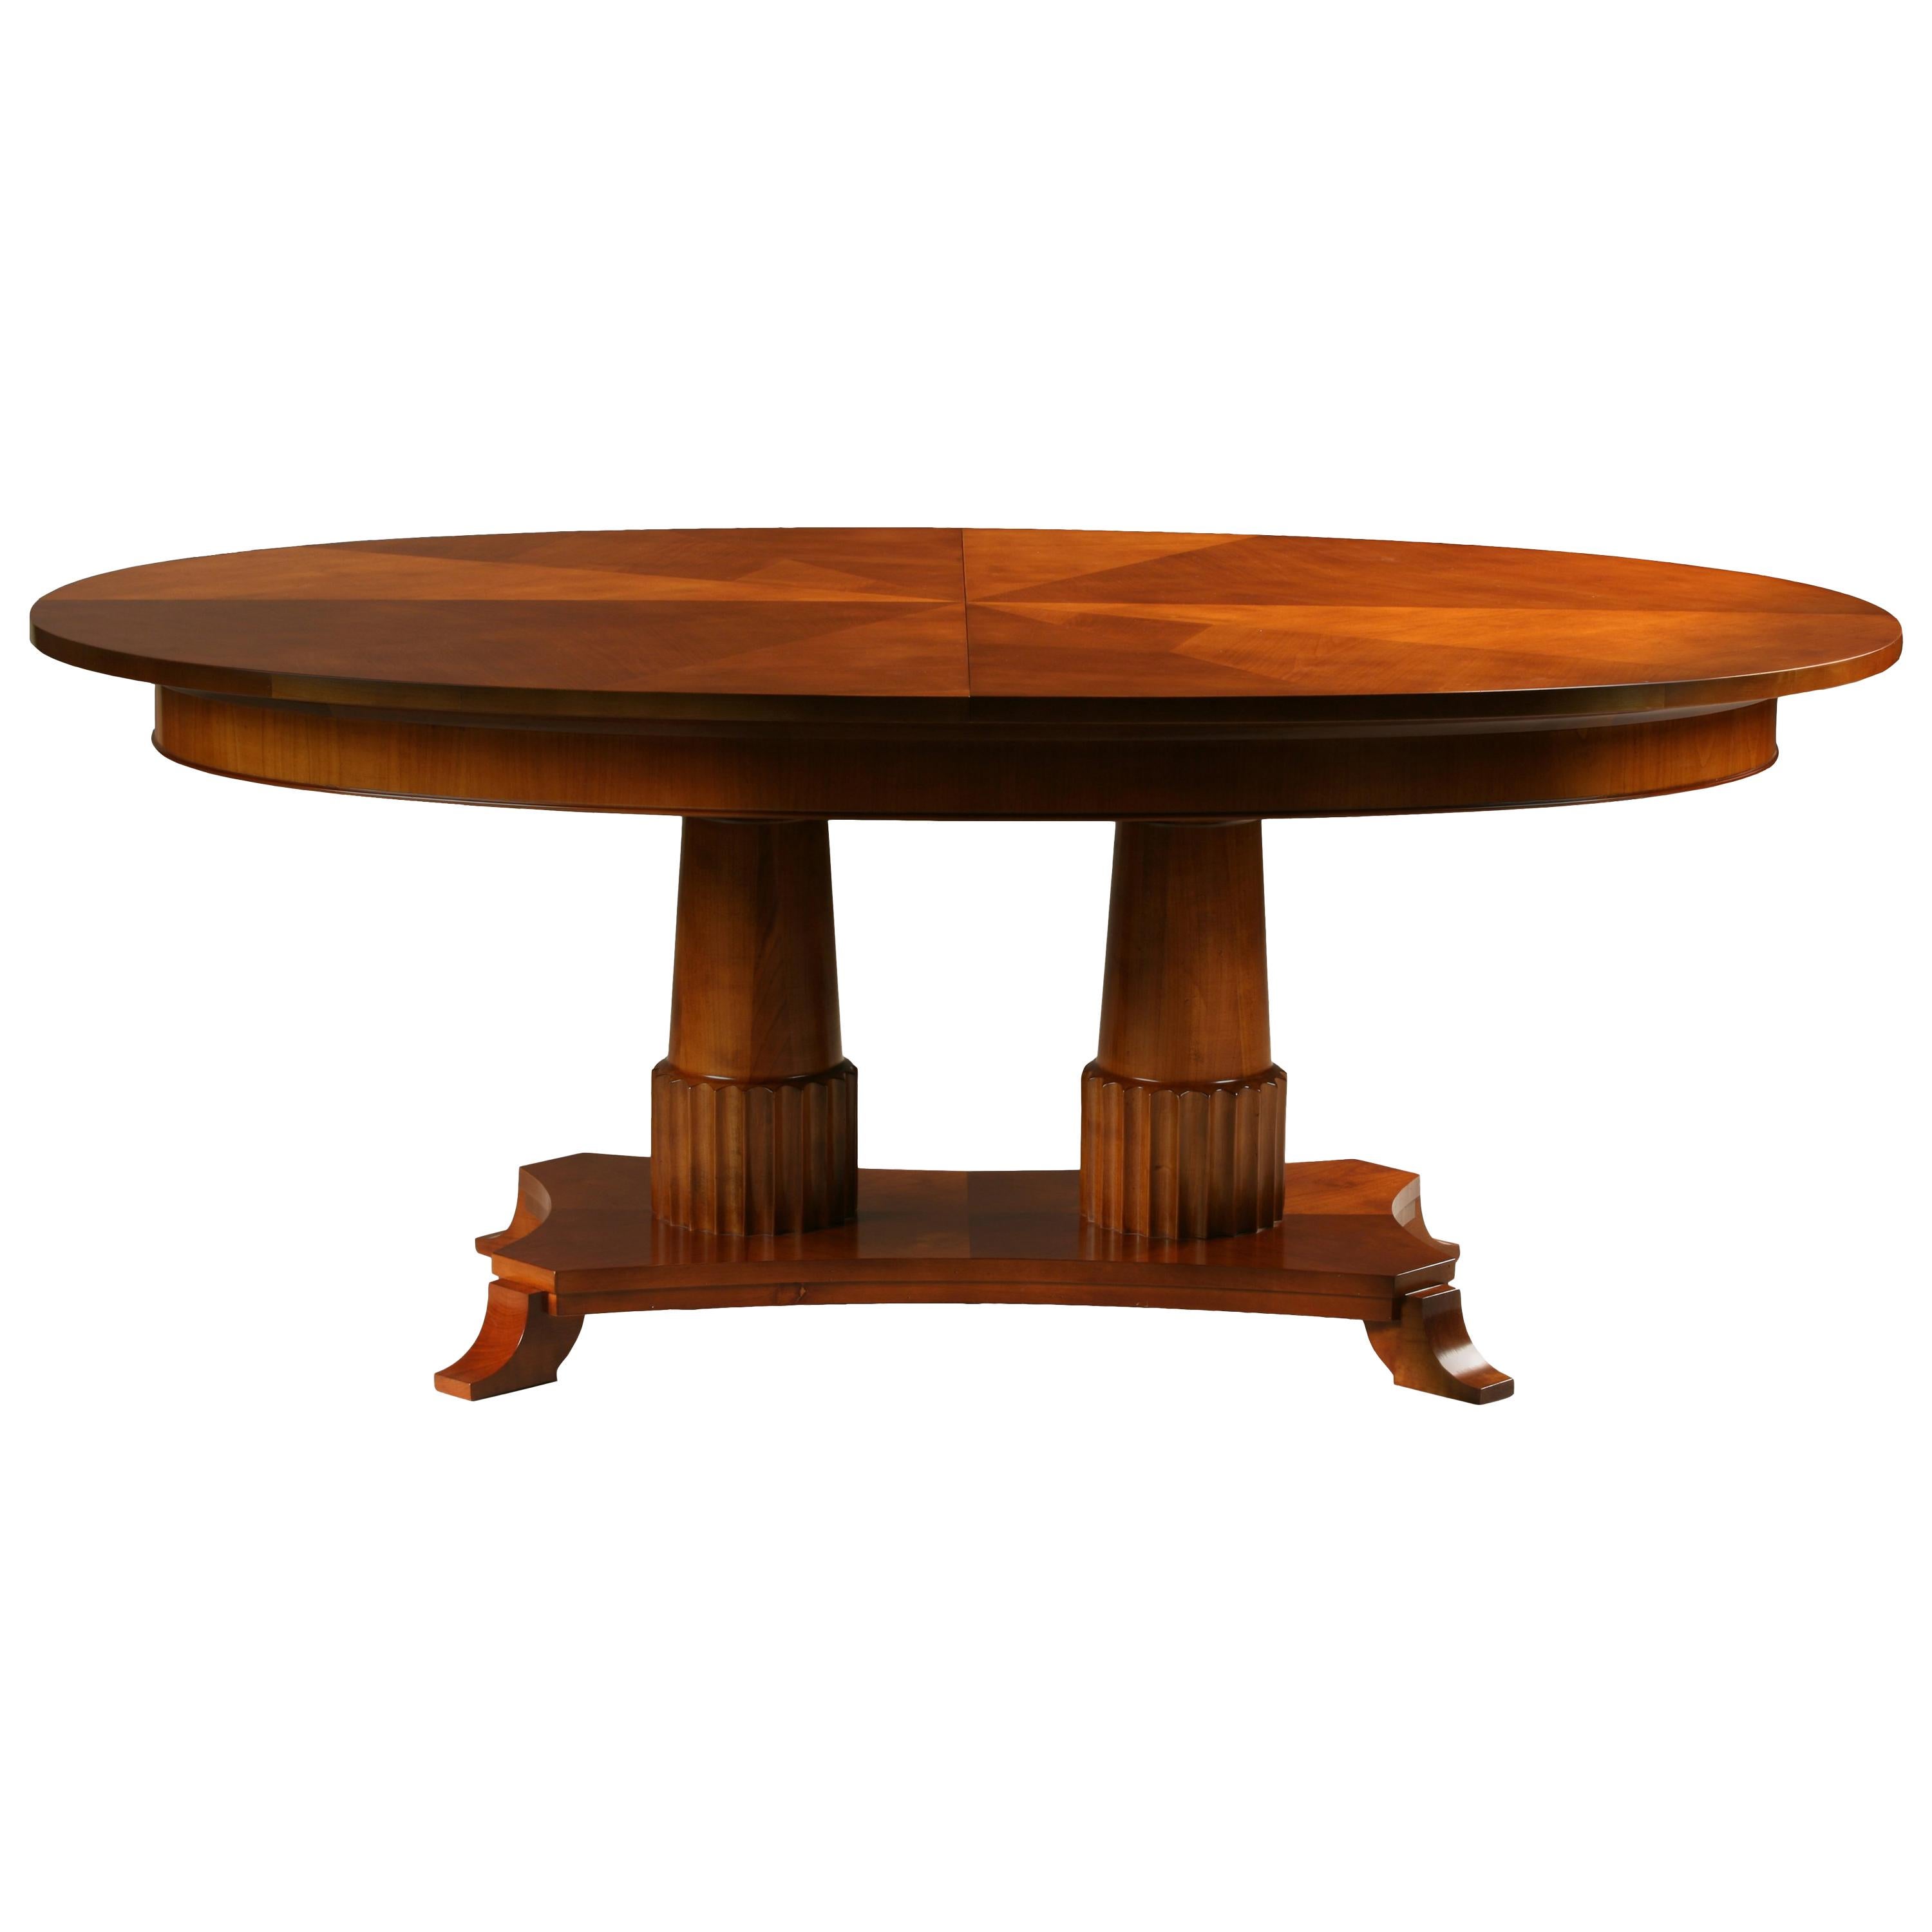 Contemporary extendable table in Biedermeier style made of cherry wood